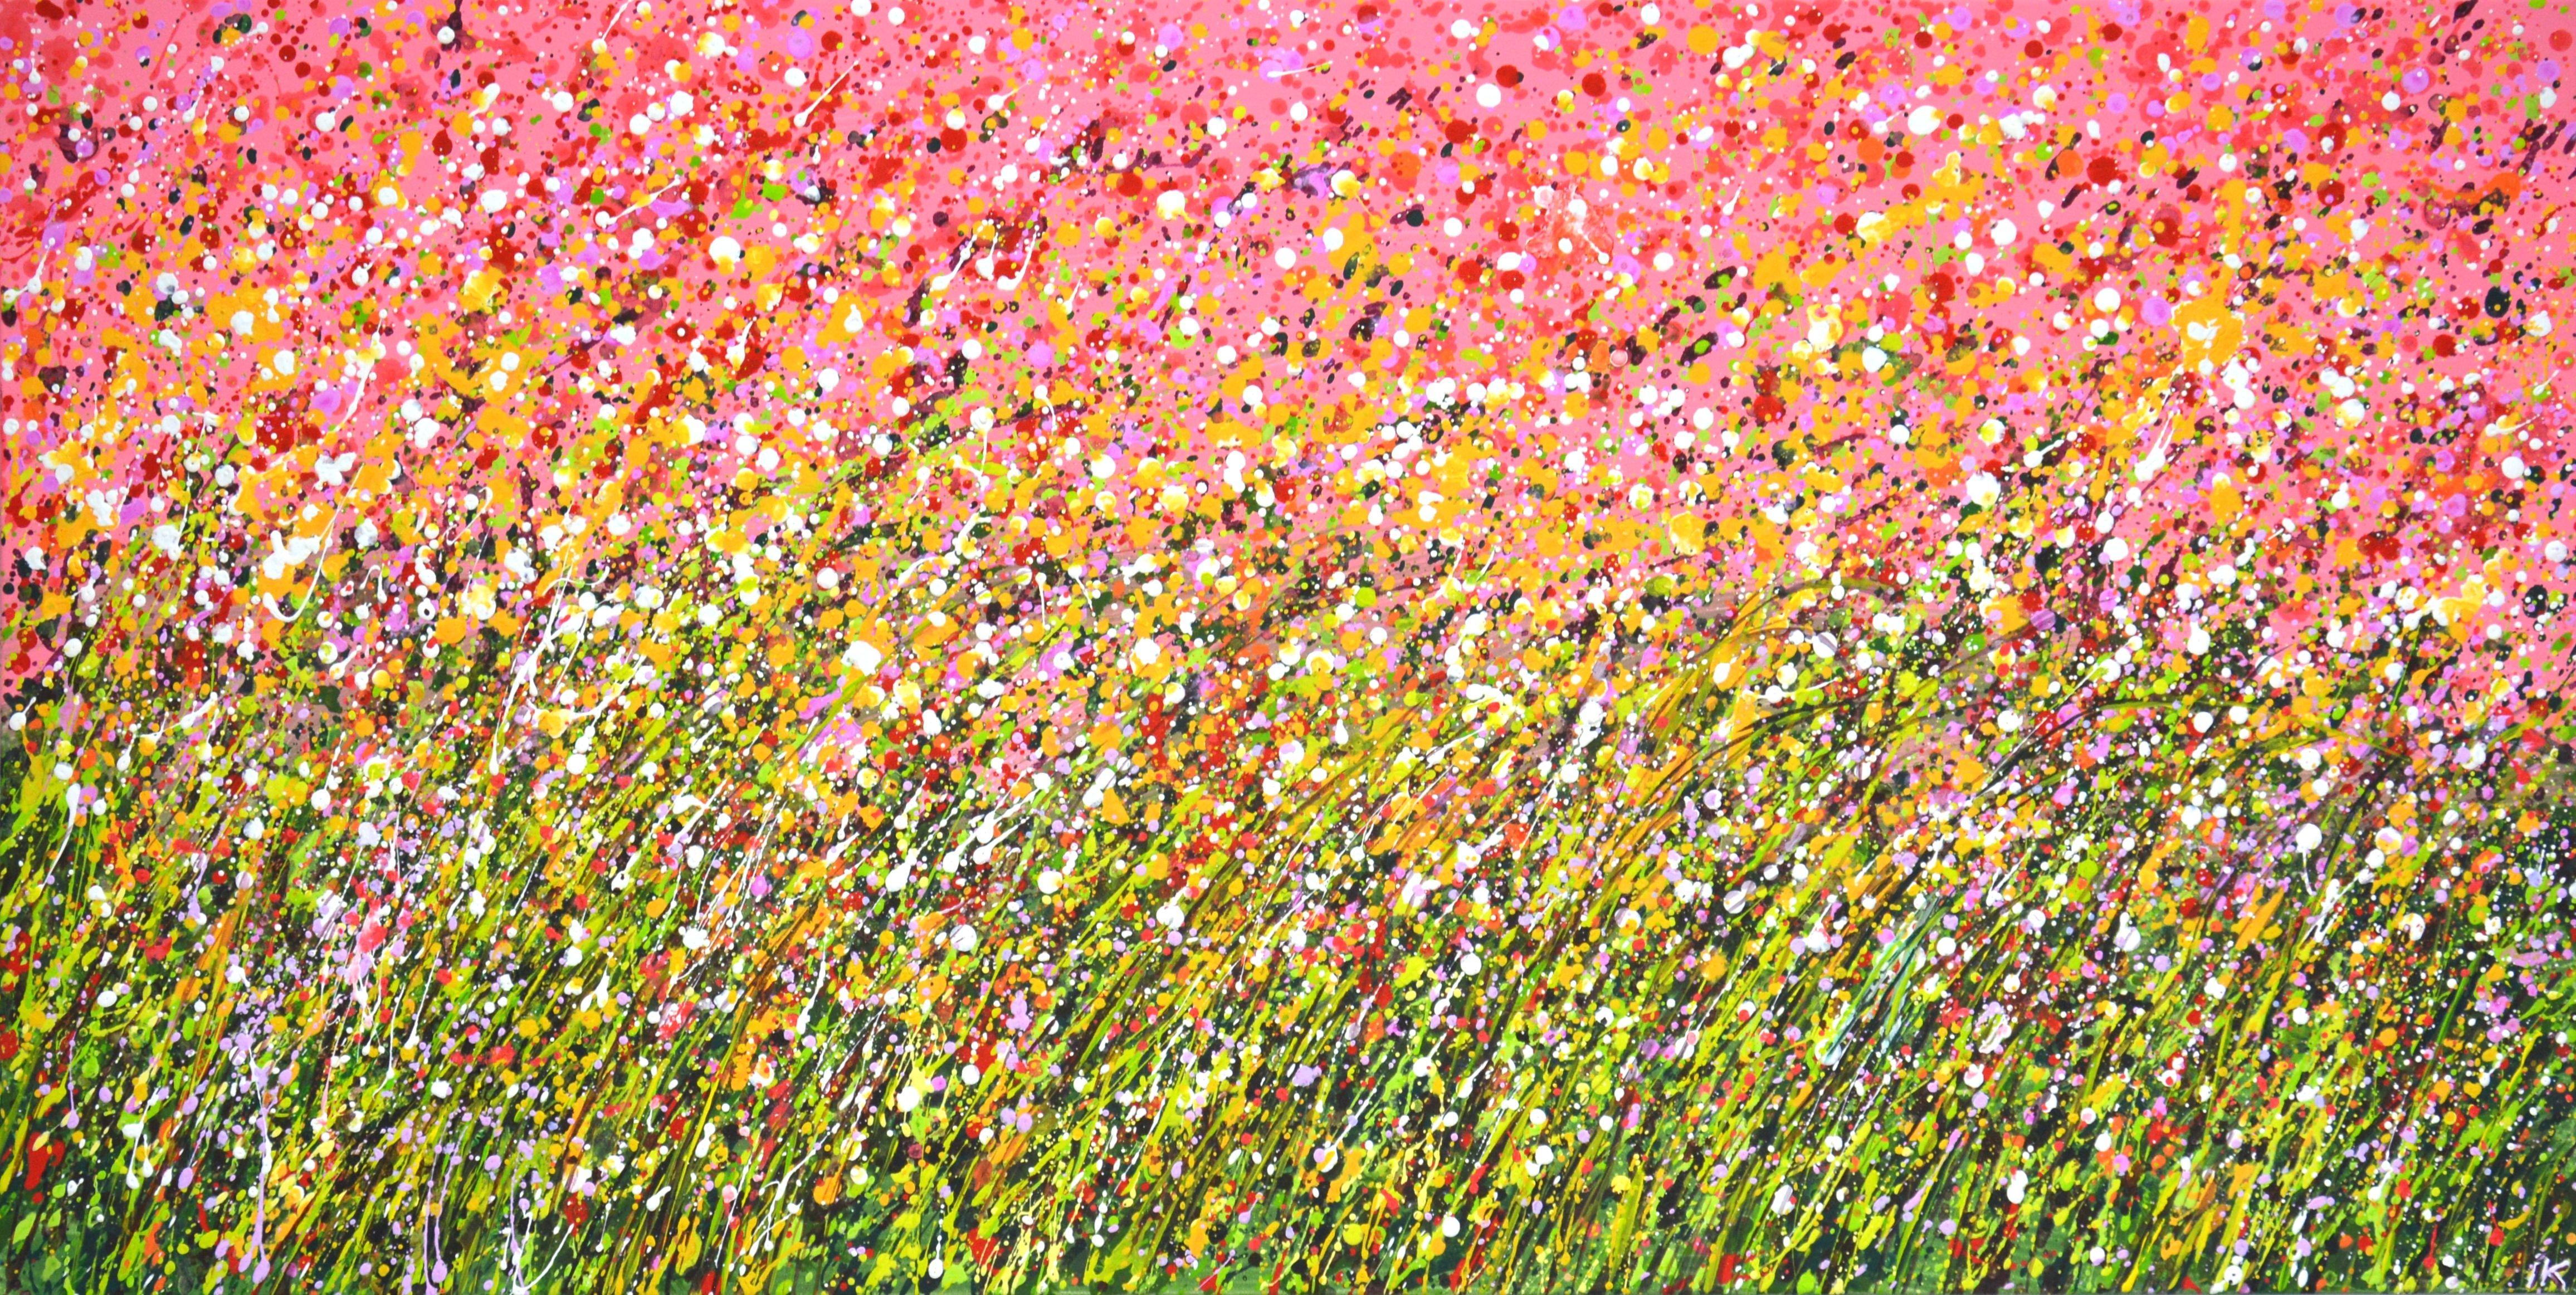 Flower field. Summer. A holiday of succulent herbs on a summer day, the whole earth is warmed with warmth, pink, red flowers create an atmosphere of relaxation, harmony and bliss. Expressionism. Nature is an inexhaustible source of inspiration. The